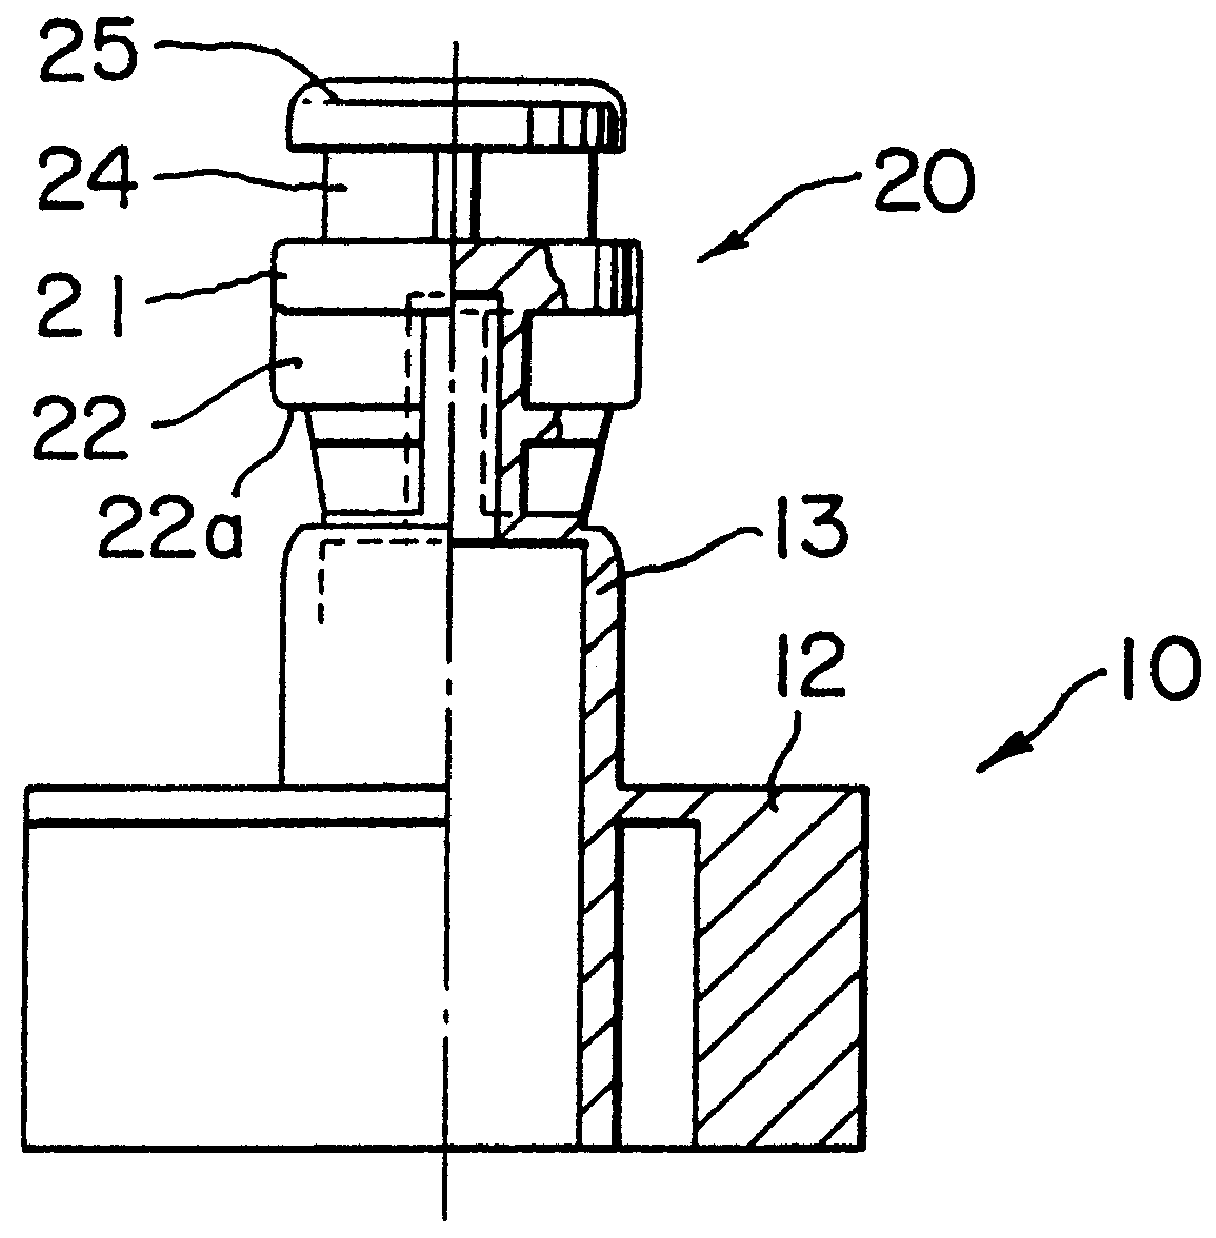 Spout assembly, spout assembly manufacturing apparatus and package with spout assembly